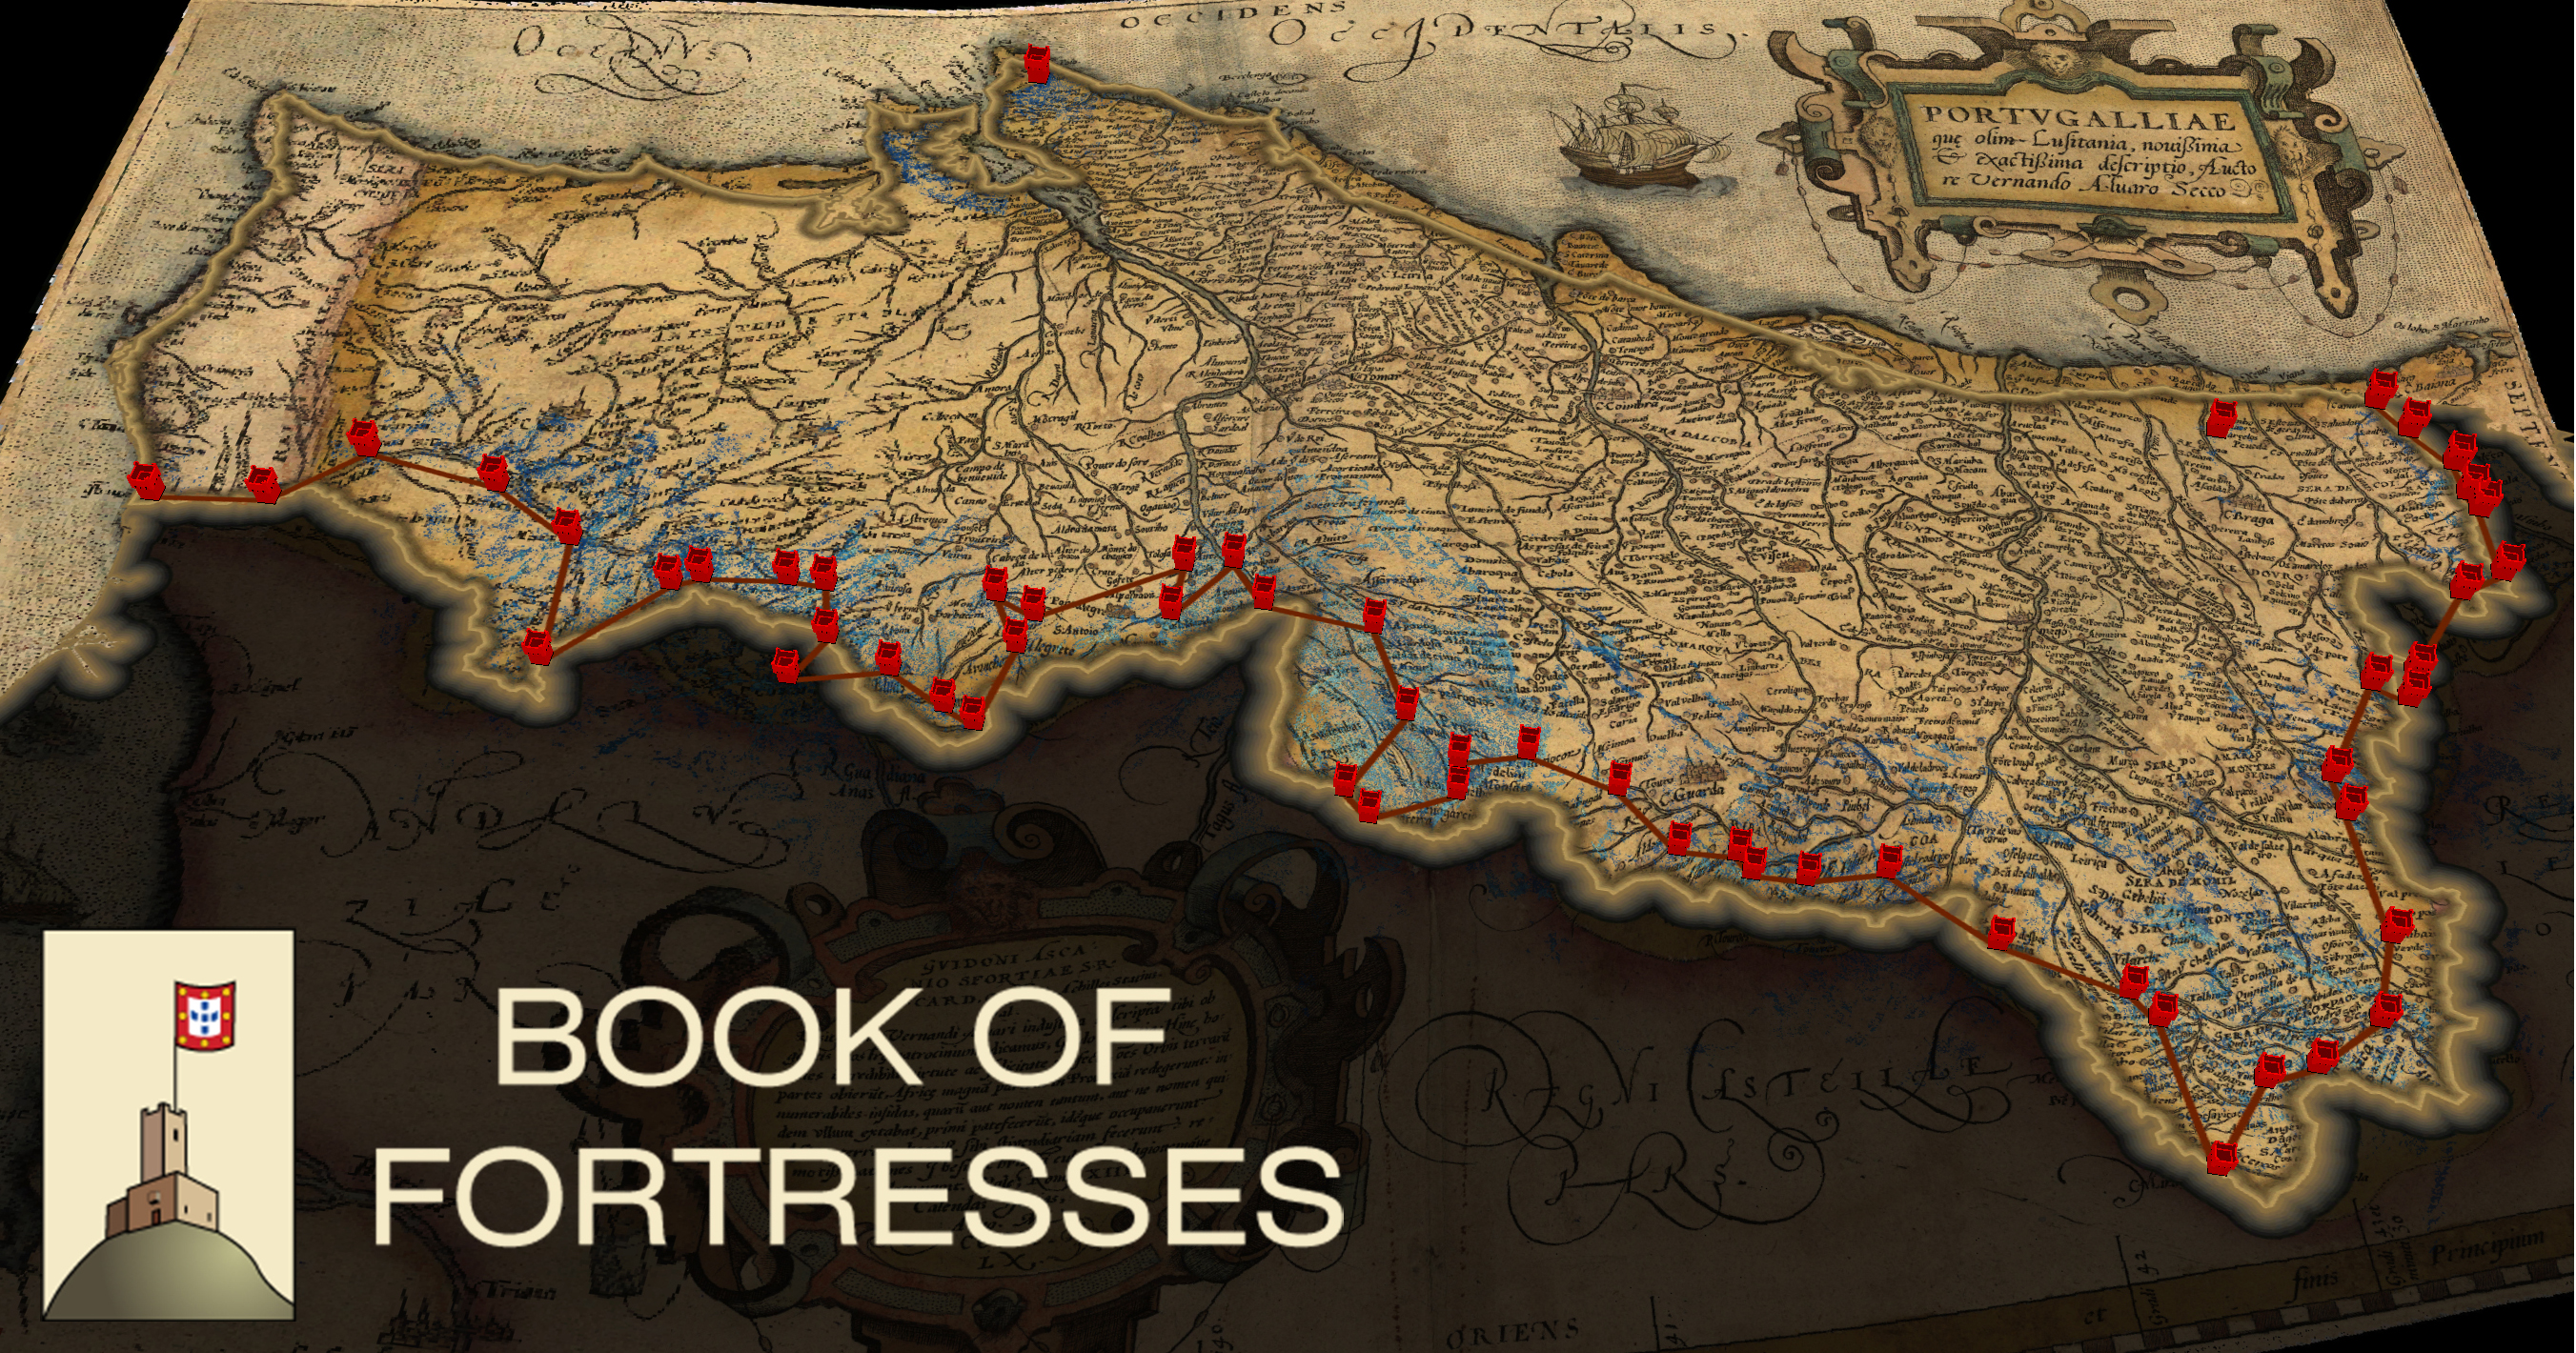 Book of Fortresses – Duke Digital Art History and Visual Culture Research  Lab